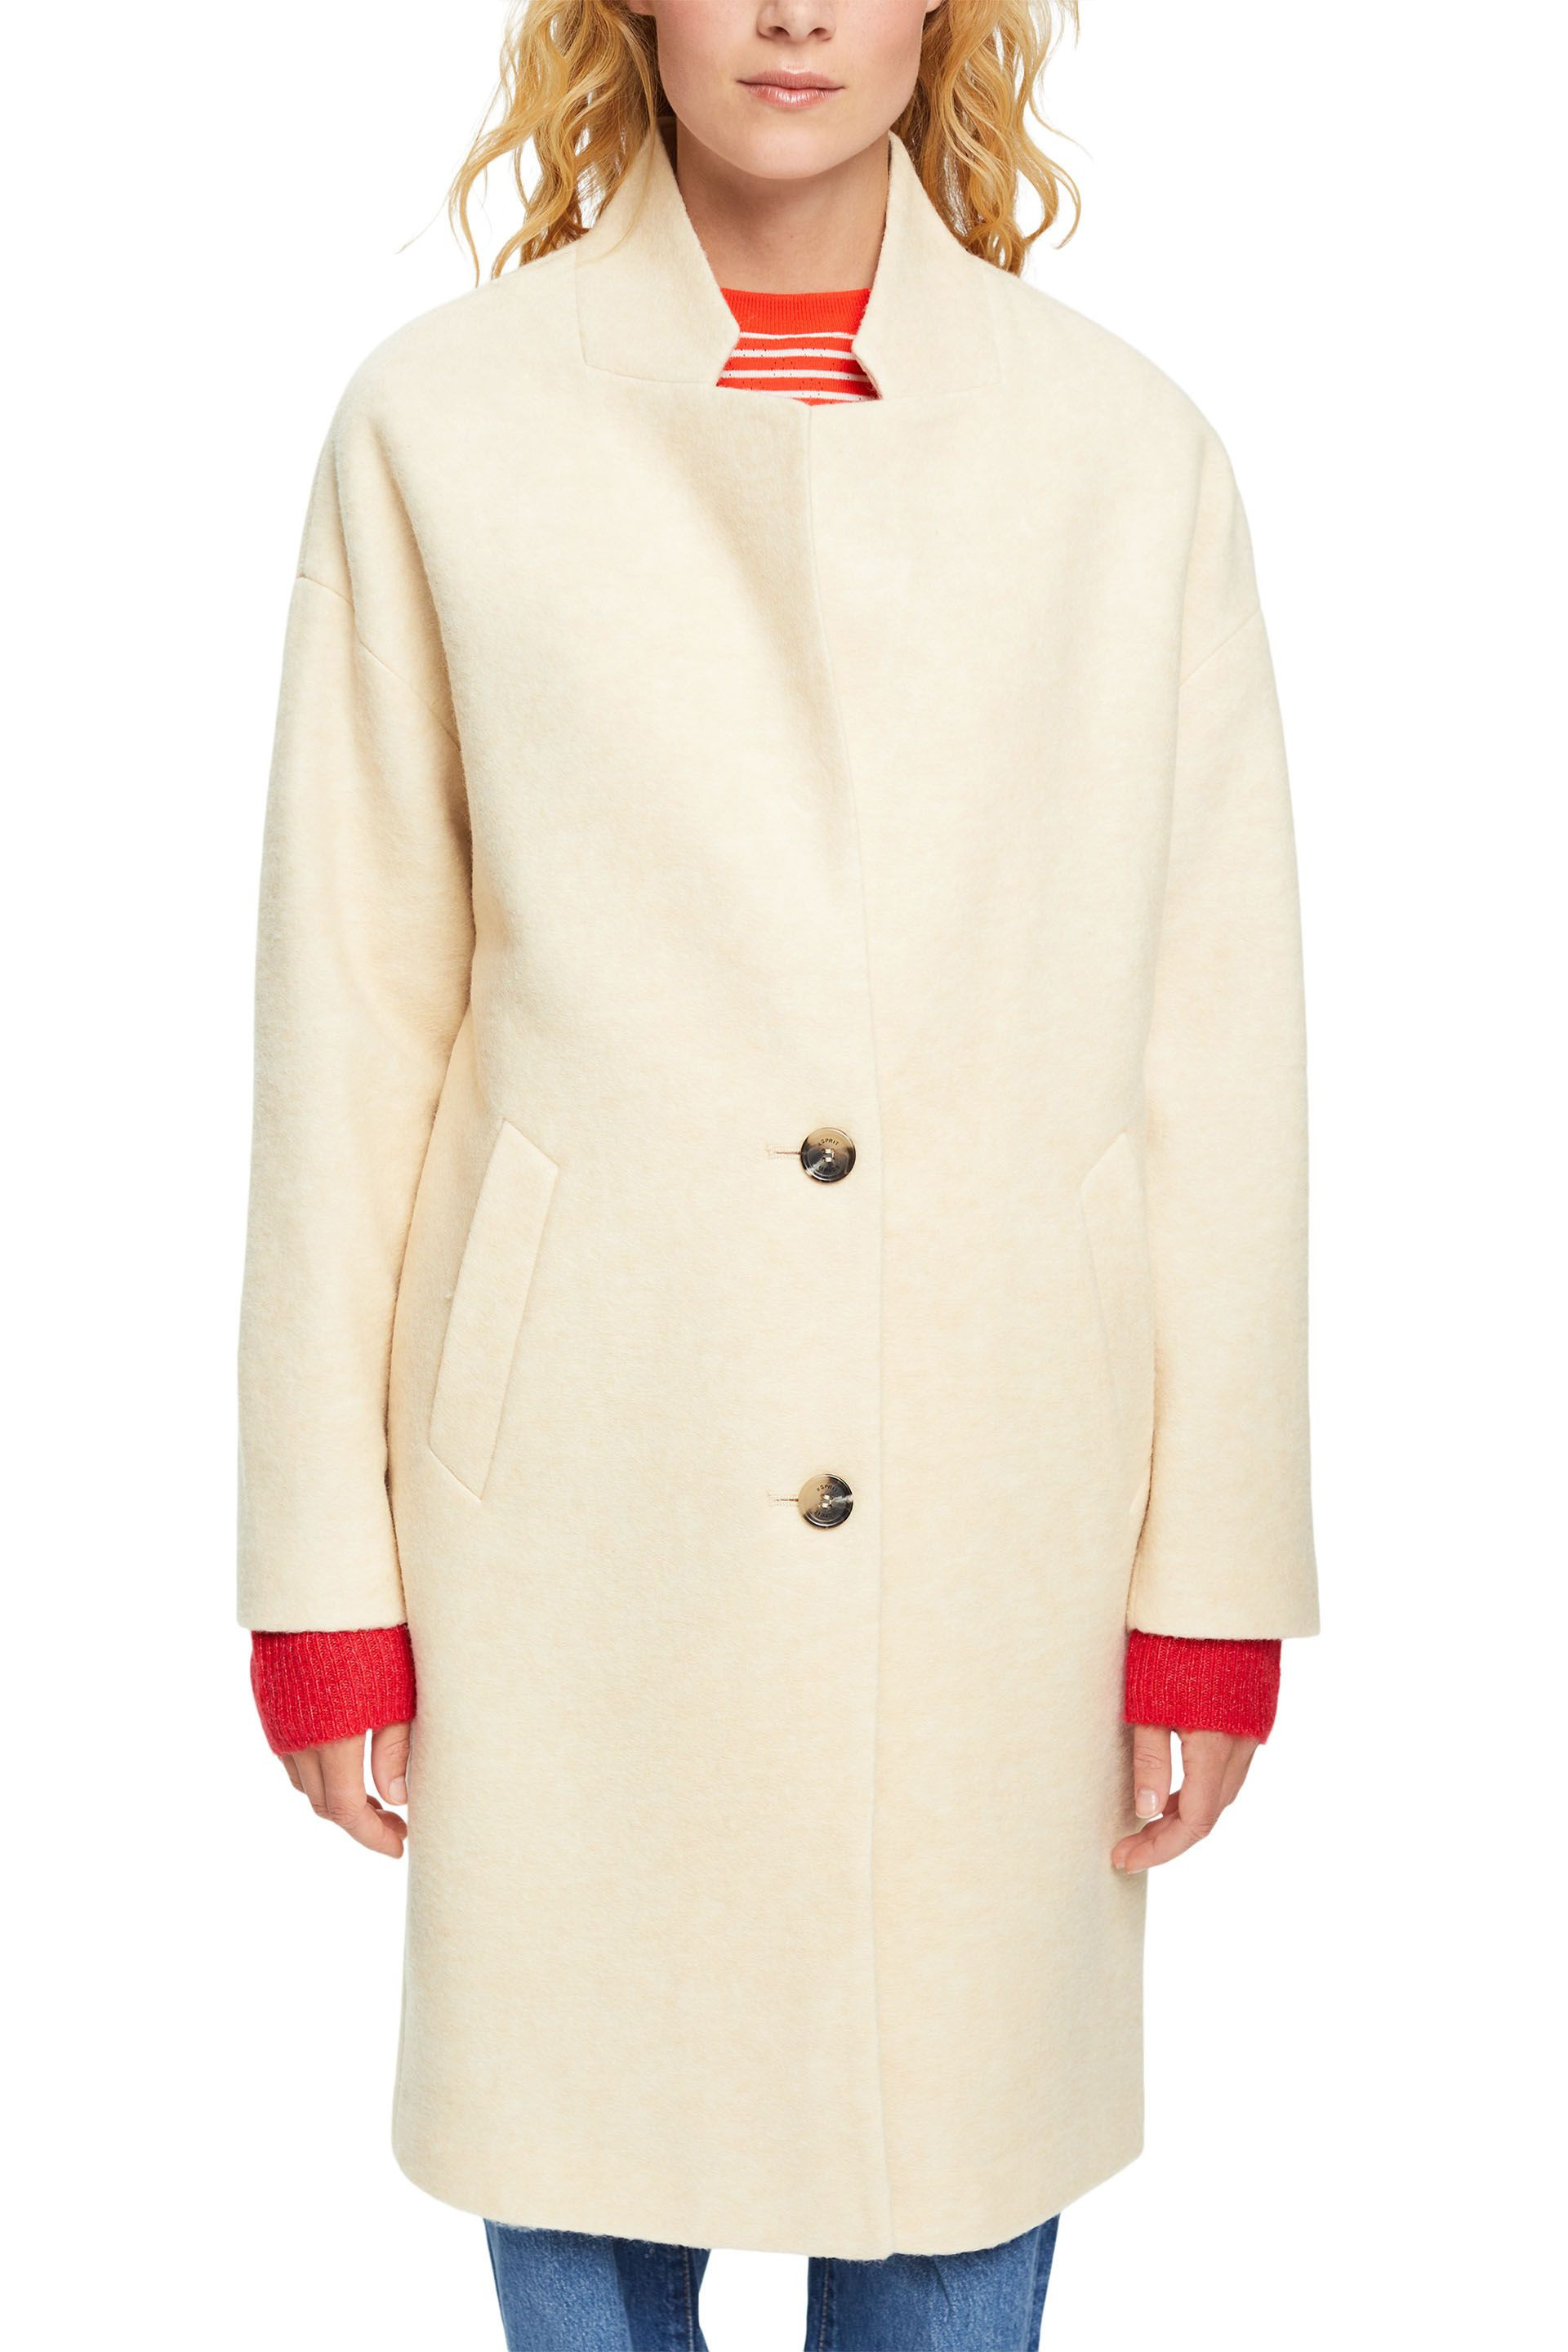 Wool blend coat with lapel collar, Beige, large image number 2